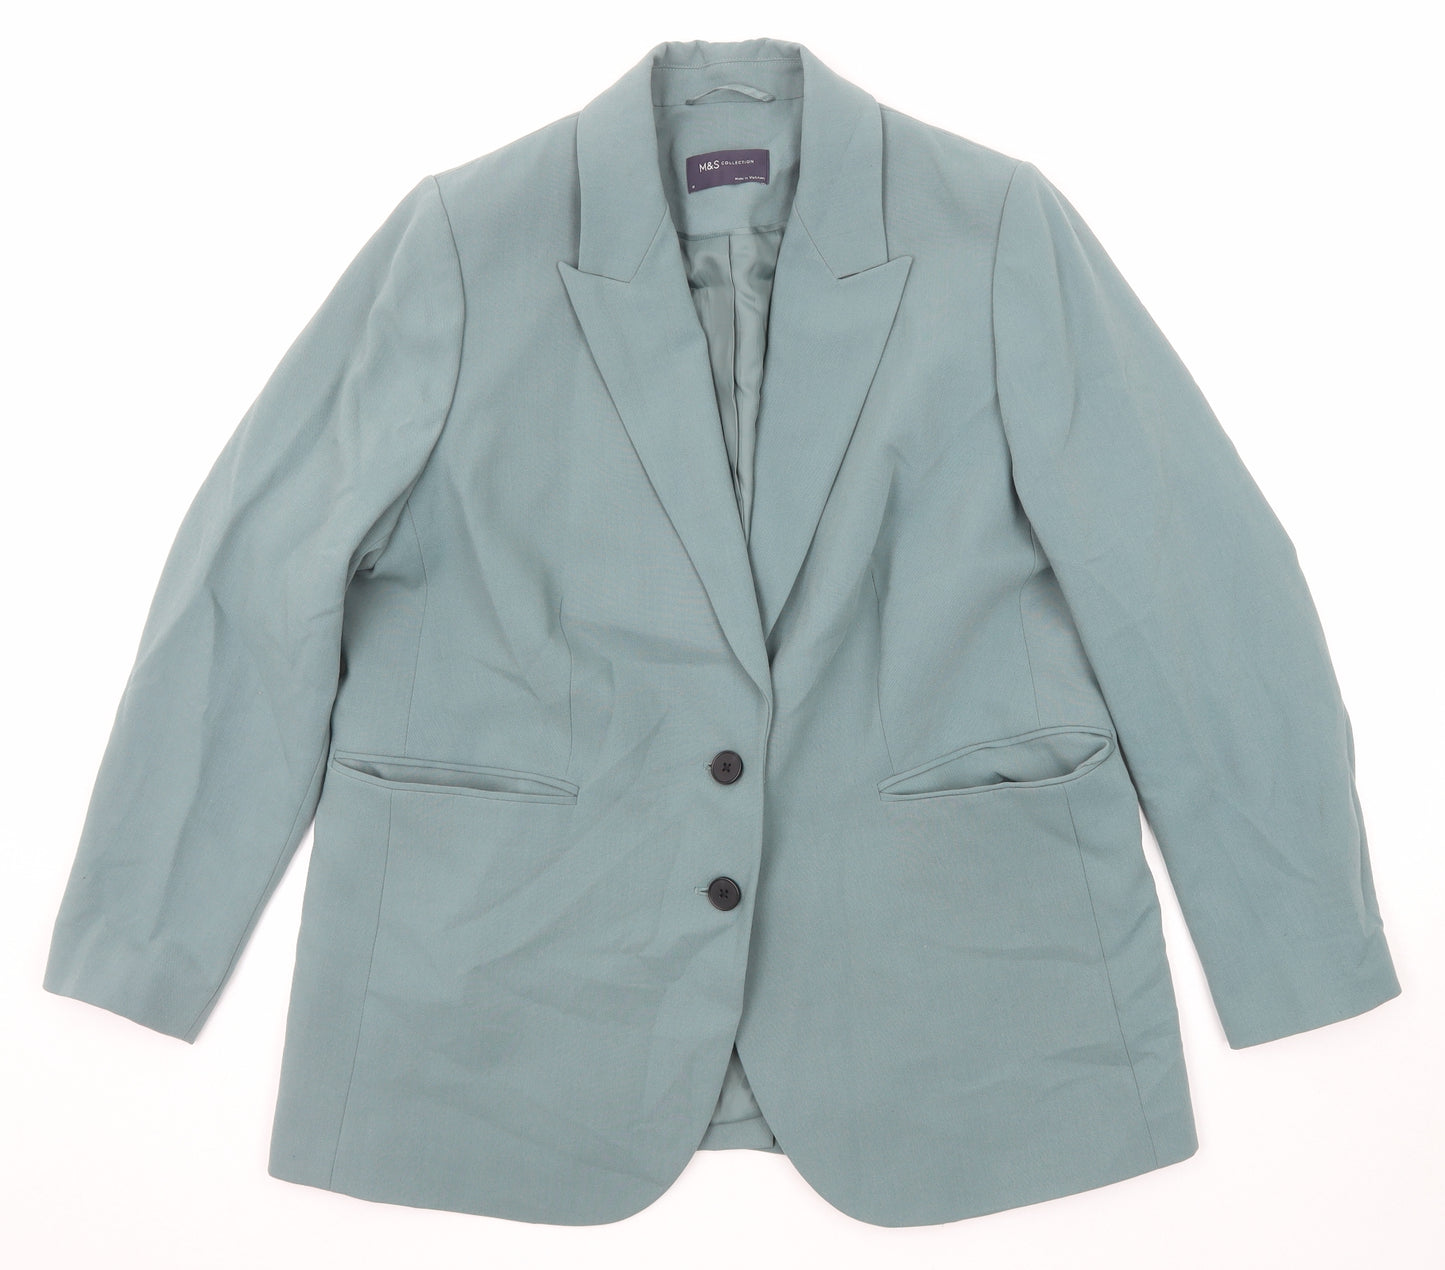 Marks and Spencer Womens Green Polyester Jacket Suit Jacket Size 18